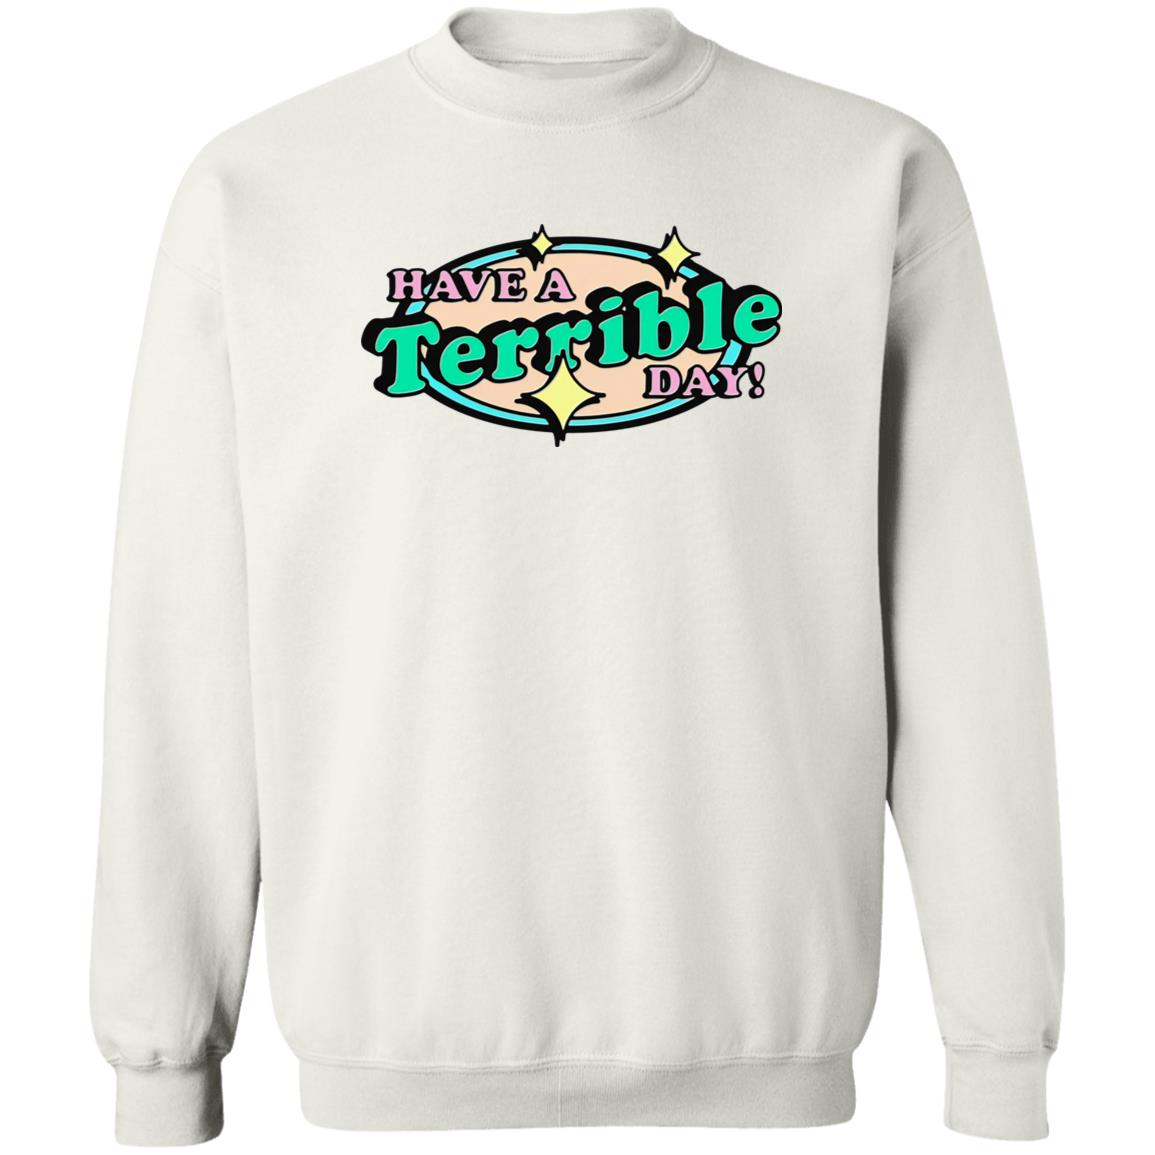 Have A Terrible Day Sweatshirt